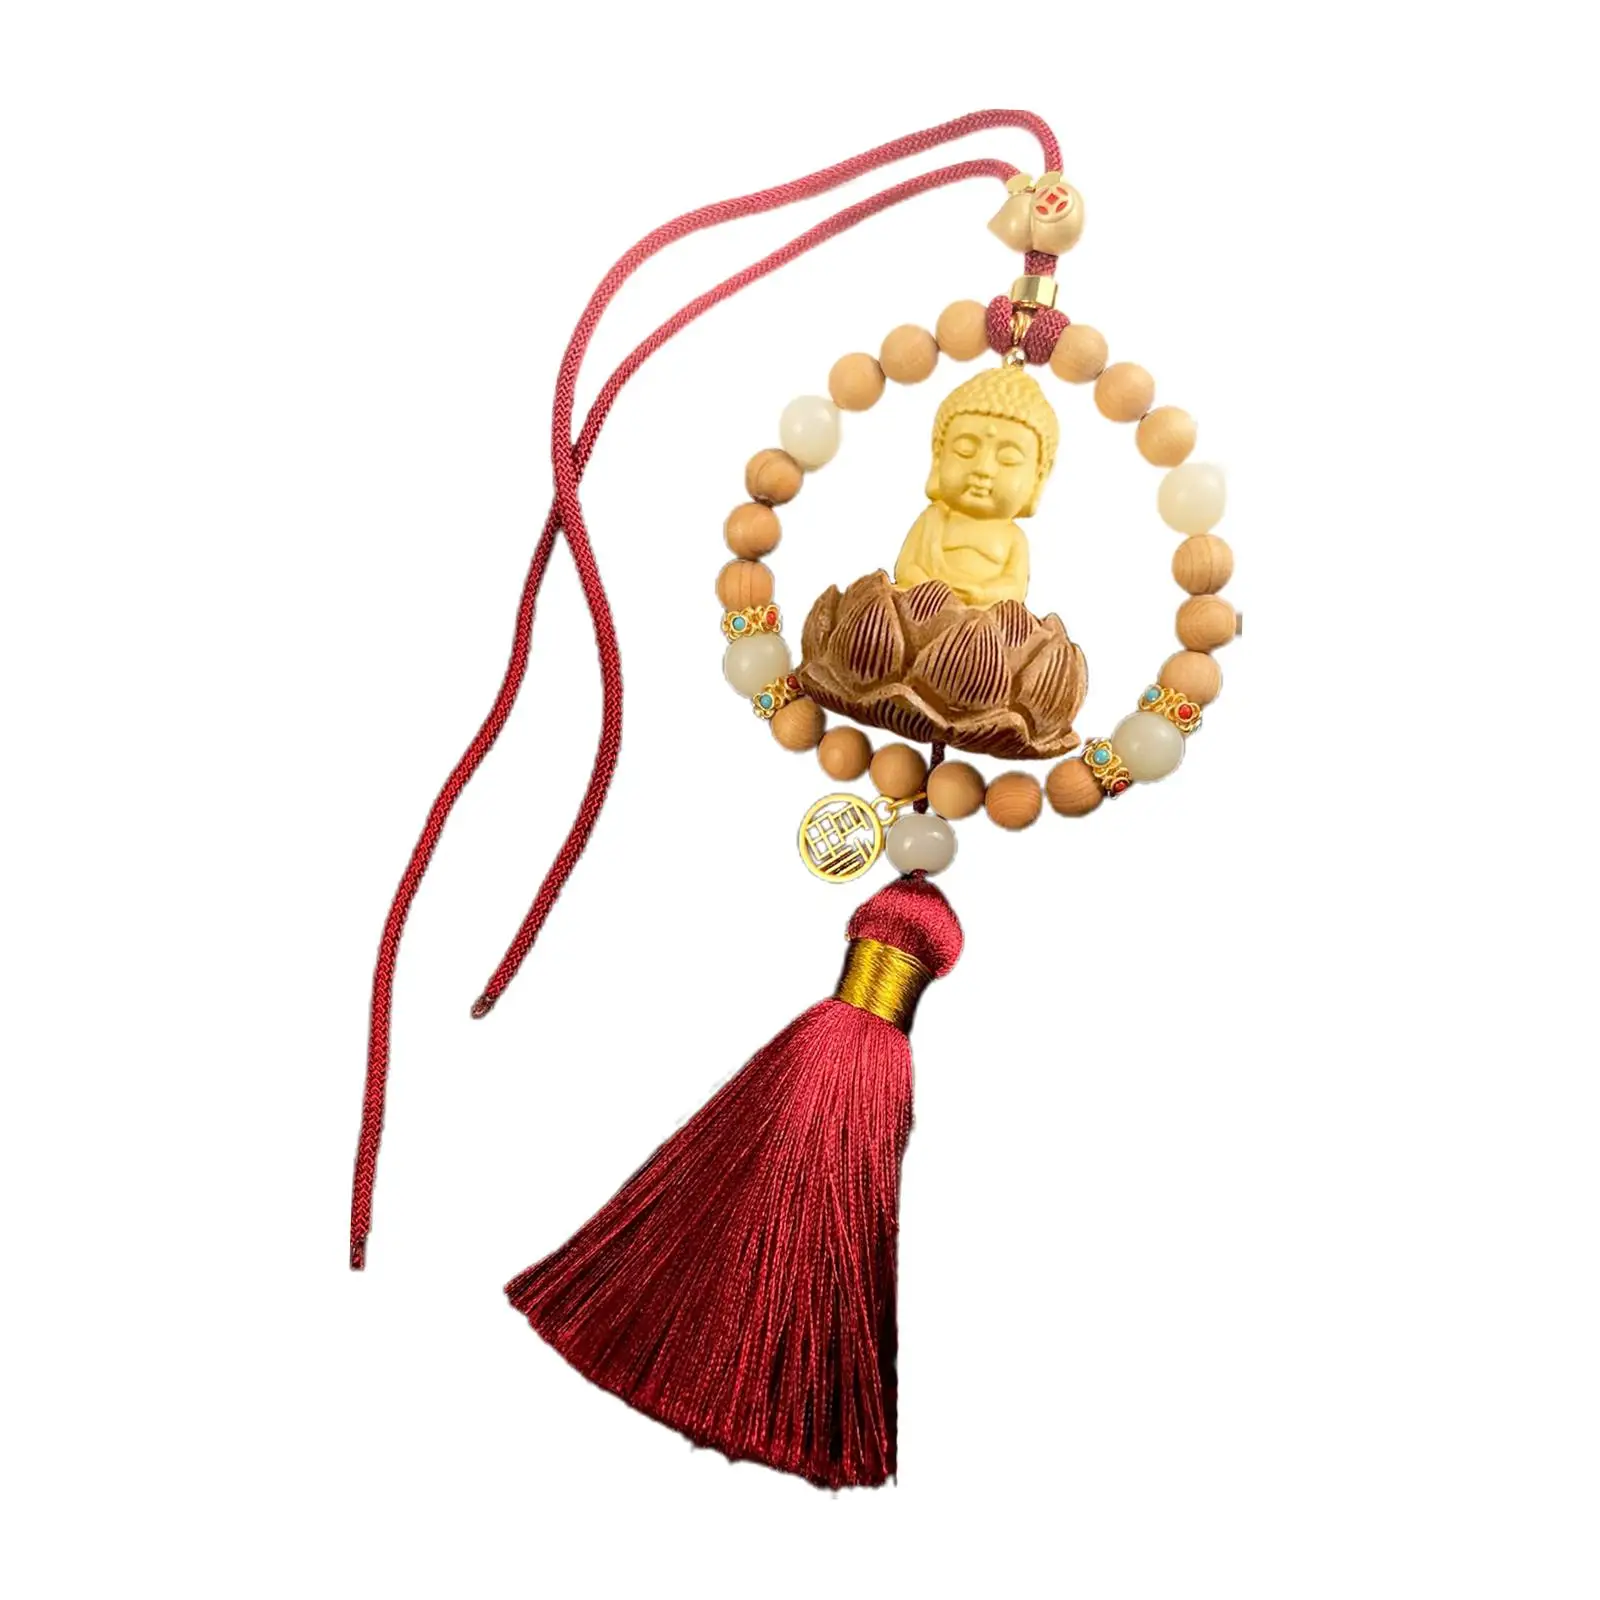 Buddha Small Figurine Gift Decorative Car Rearview Mirror Charm Pendant Auto Interior Decoration for Wall House Door Window